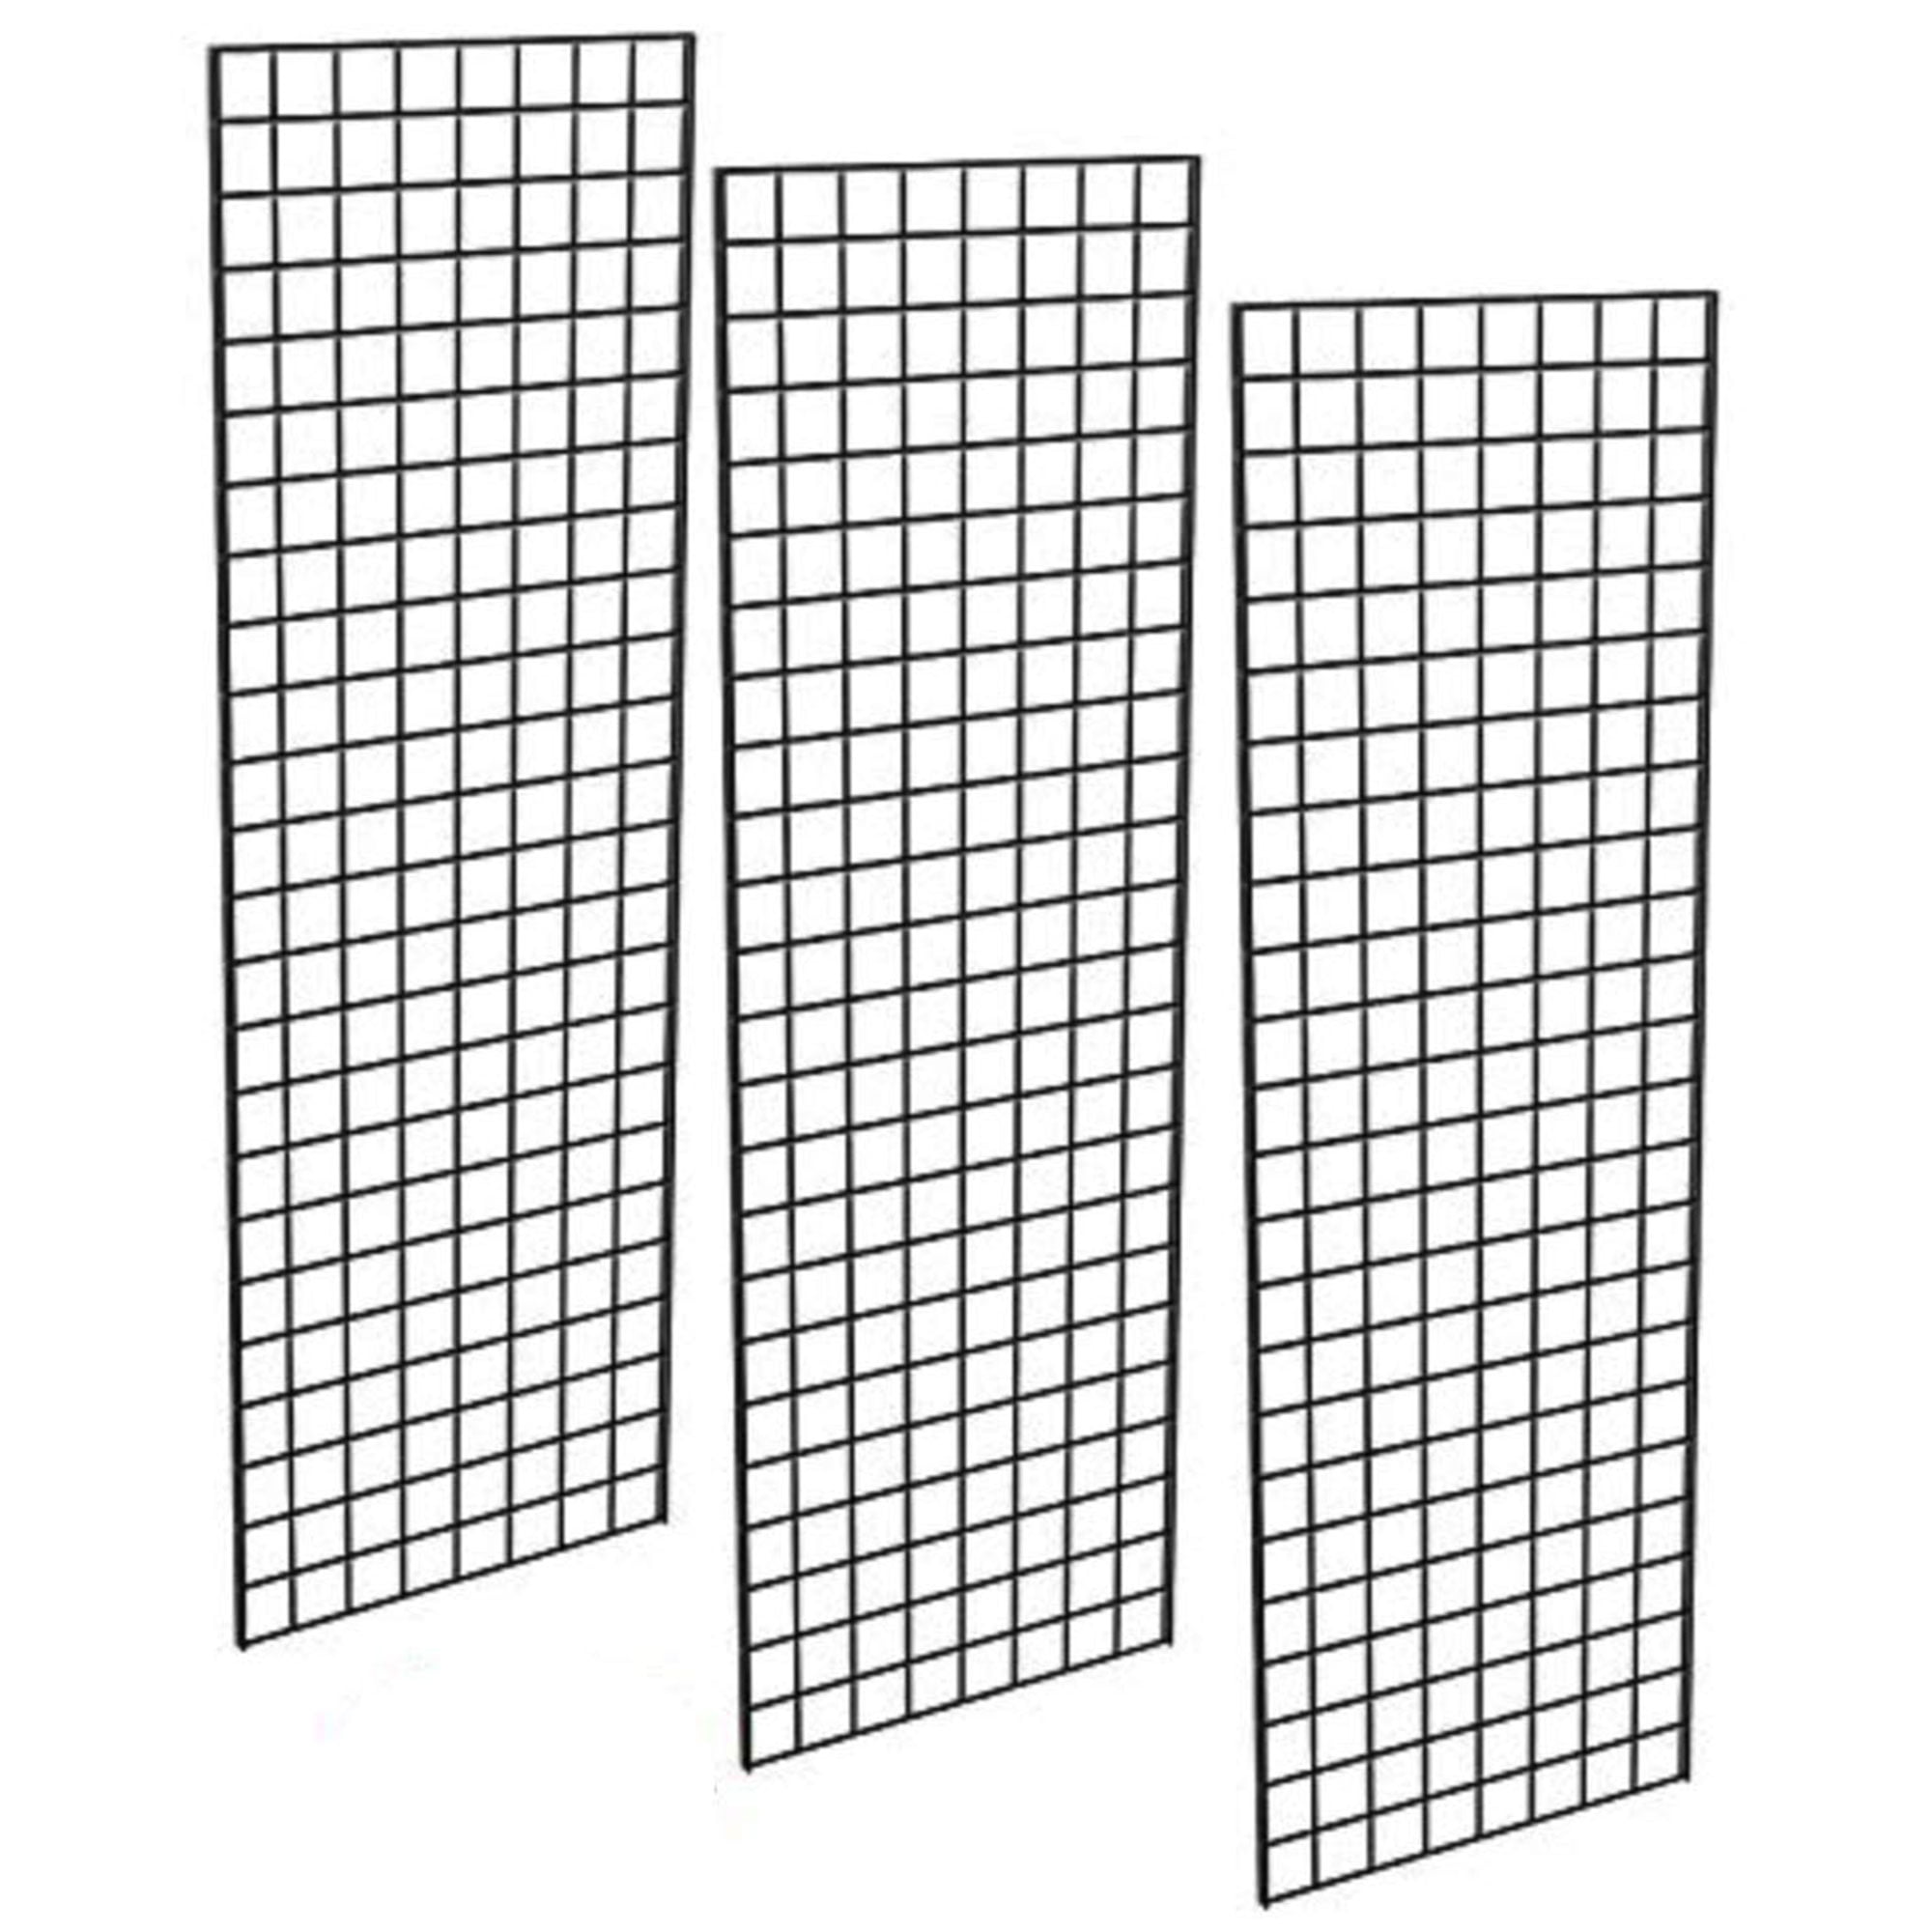 Econoco Commerical Slatgrid Panels Pack of 3 White 2 Width x 7 Height 